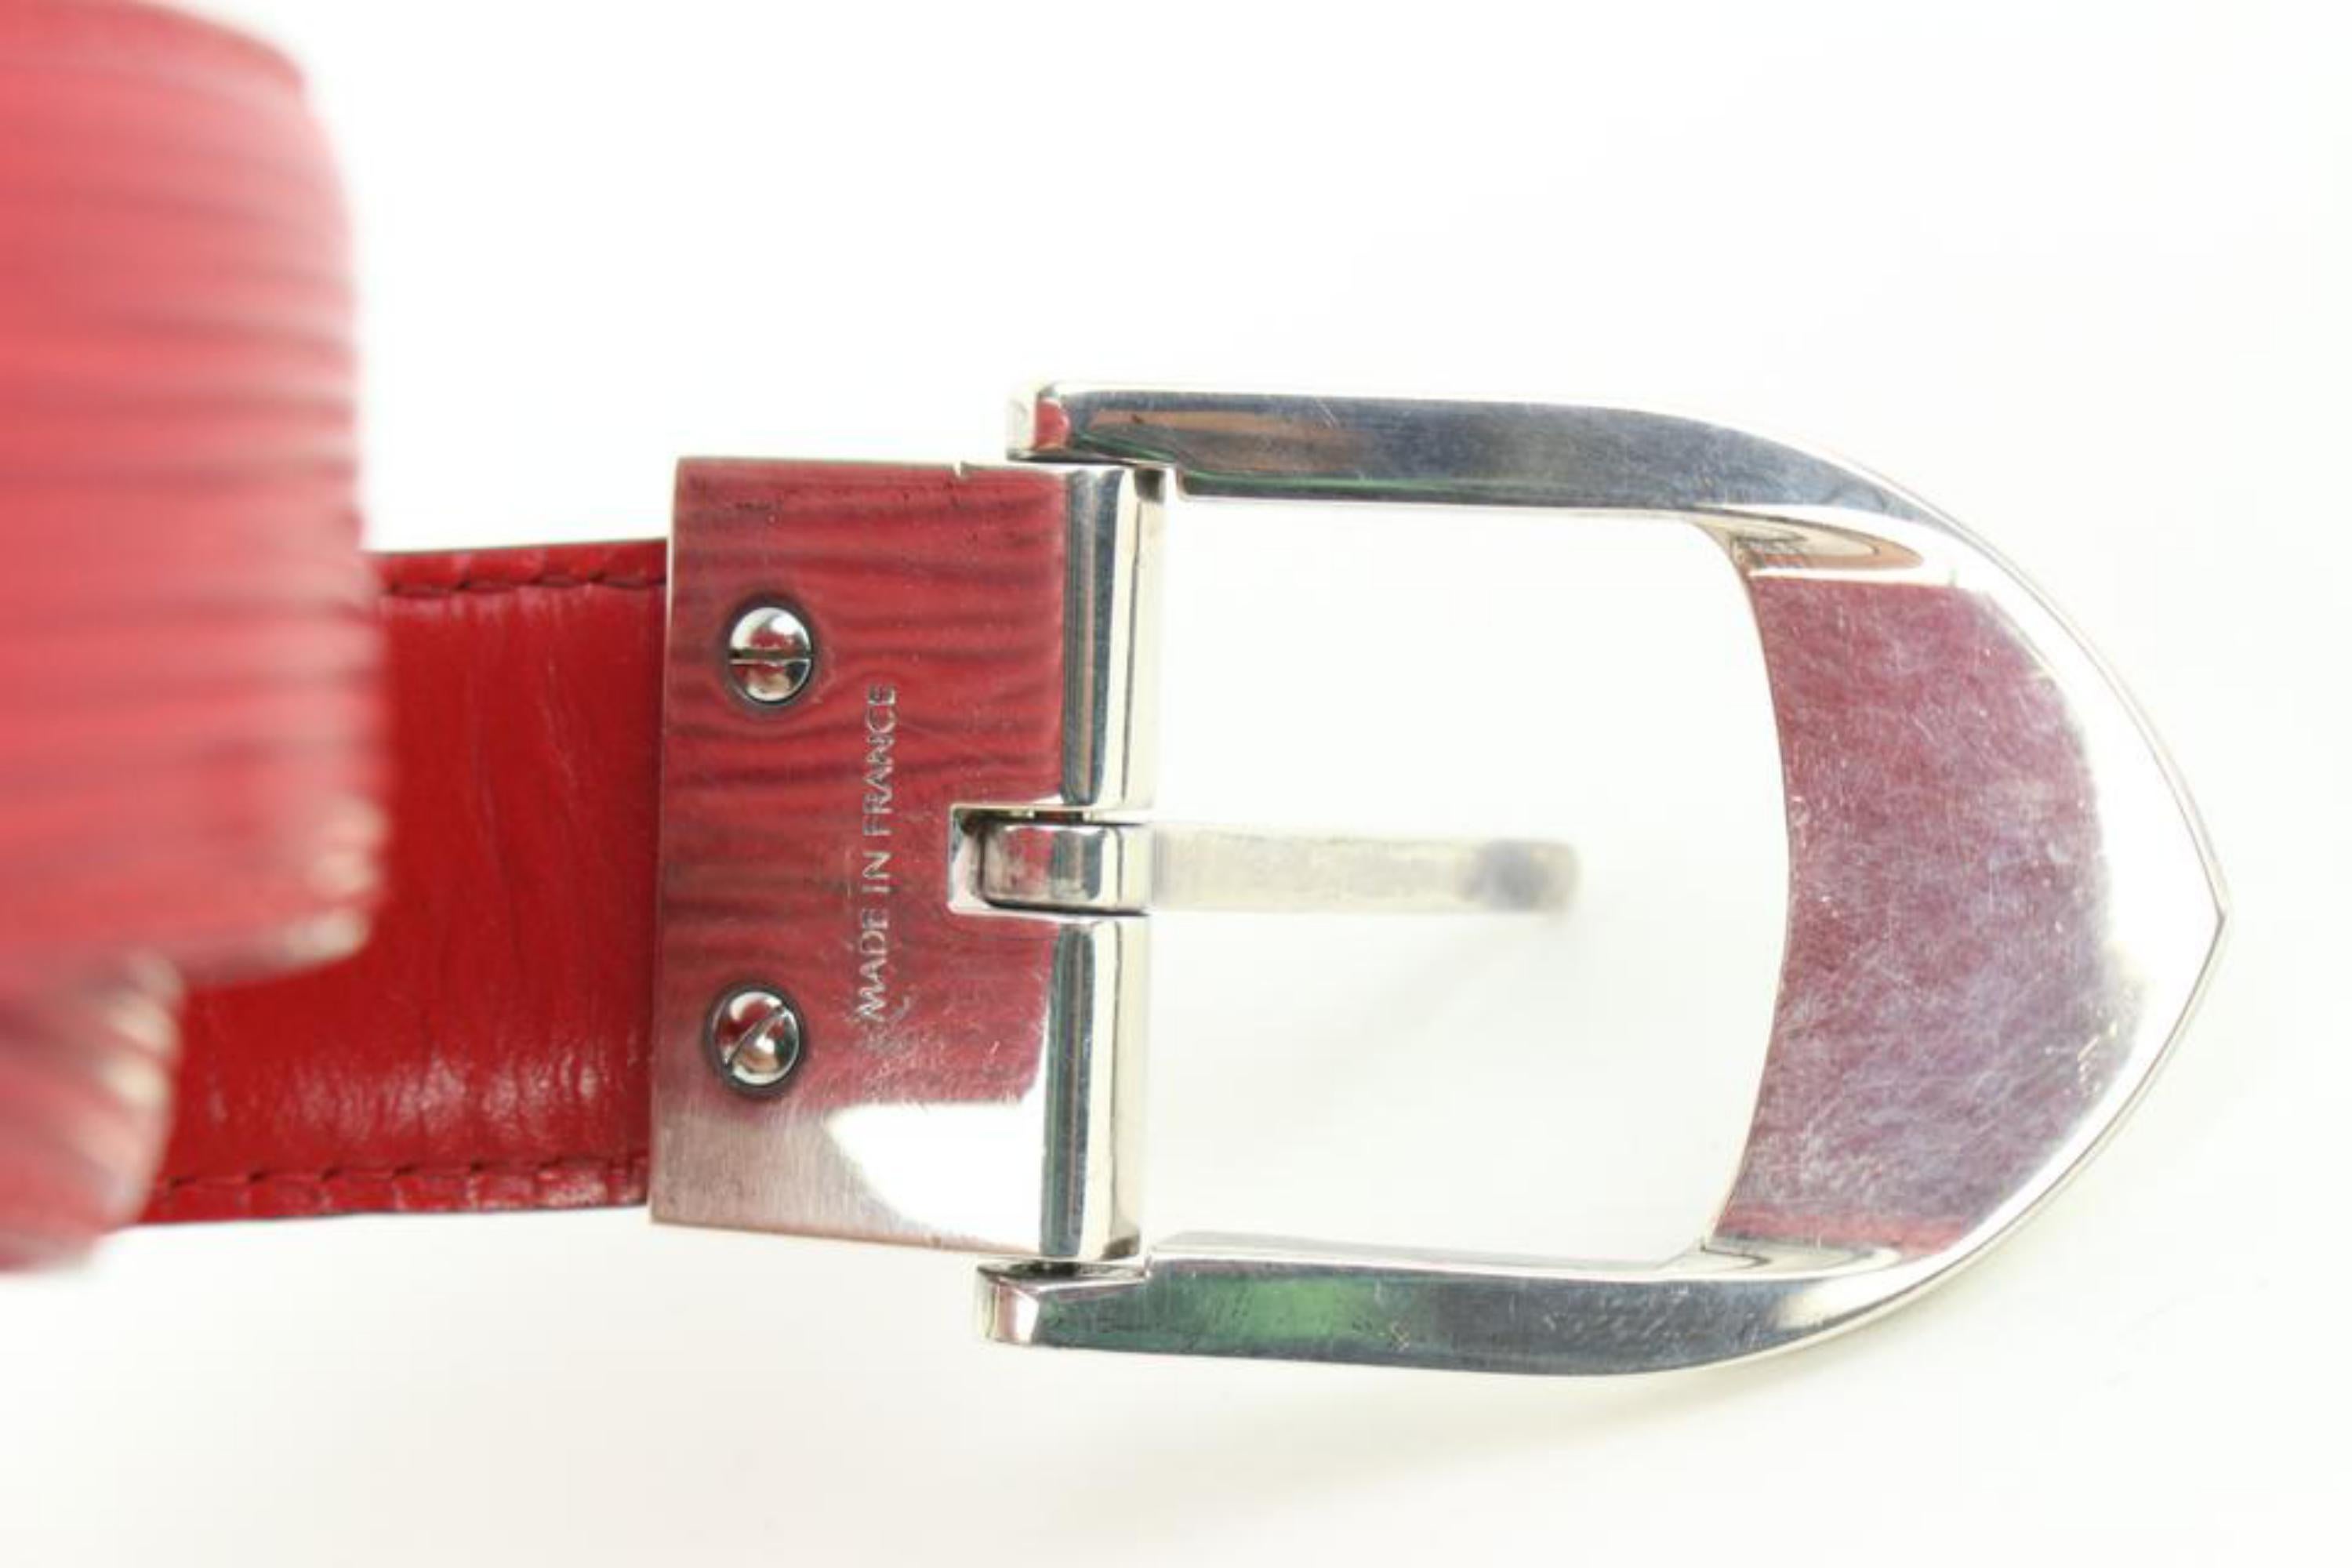 Louis Vuitton 85/34 Red Epi Leather Ceinture Belt Silver Buckle 95lk412s
Date Code/Serial Number: CT0916
Made In: France
Measurements: Length:  32.5